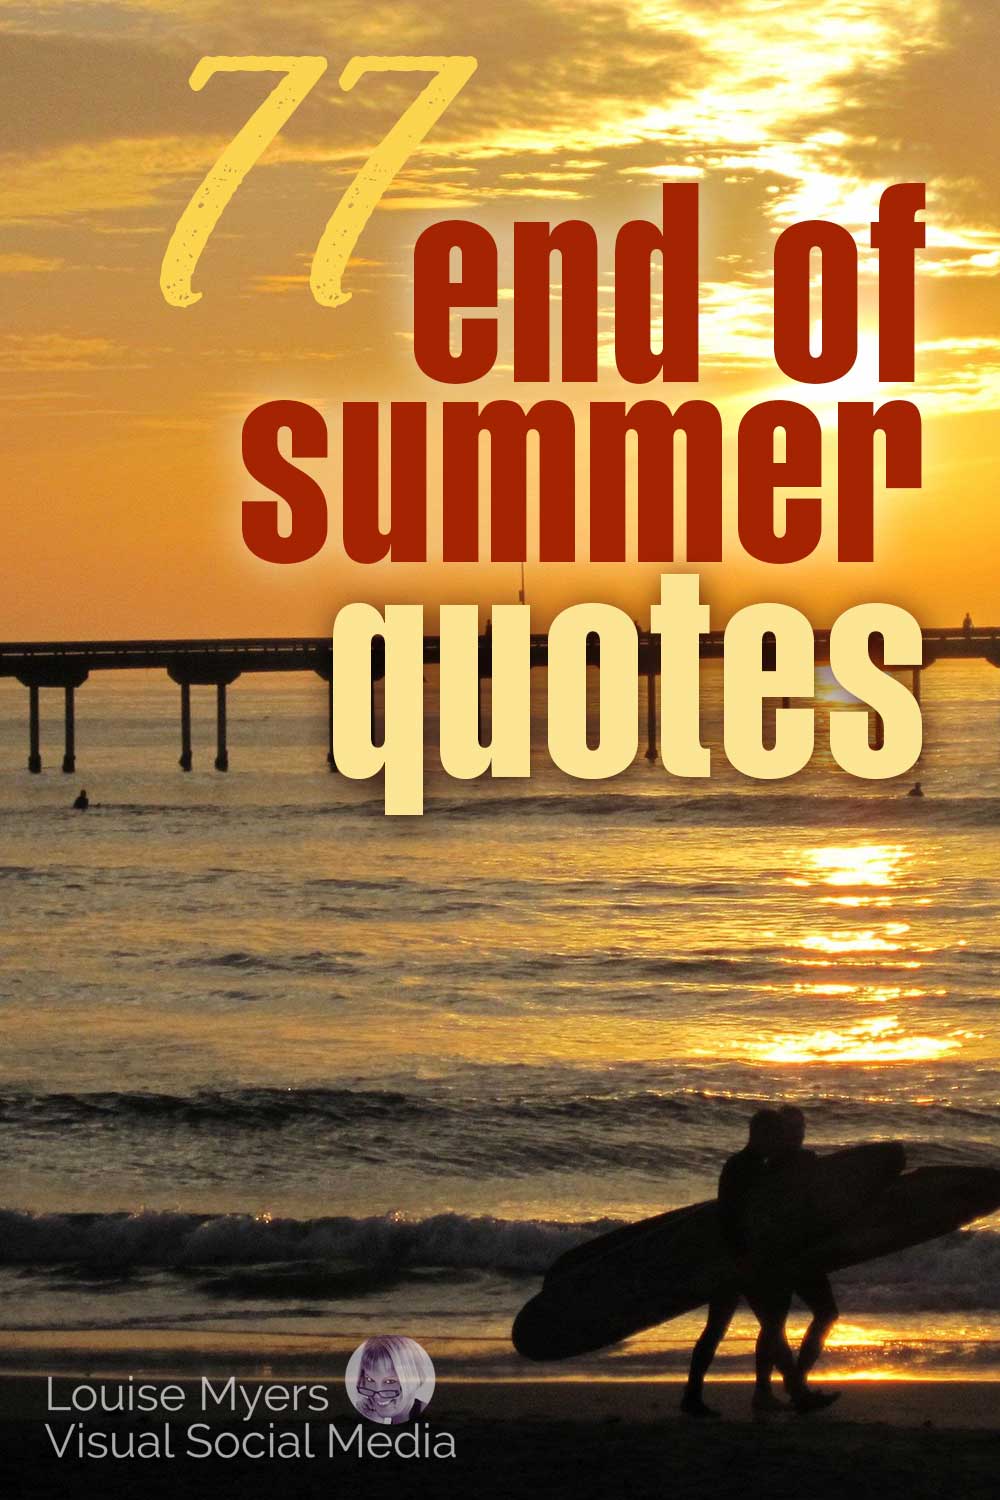 surfers on beach at sunset in golden colors has text 77 end of summer quotes.